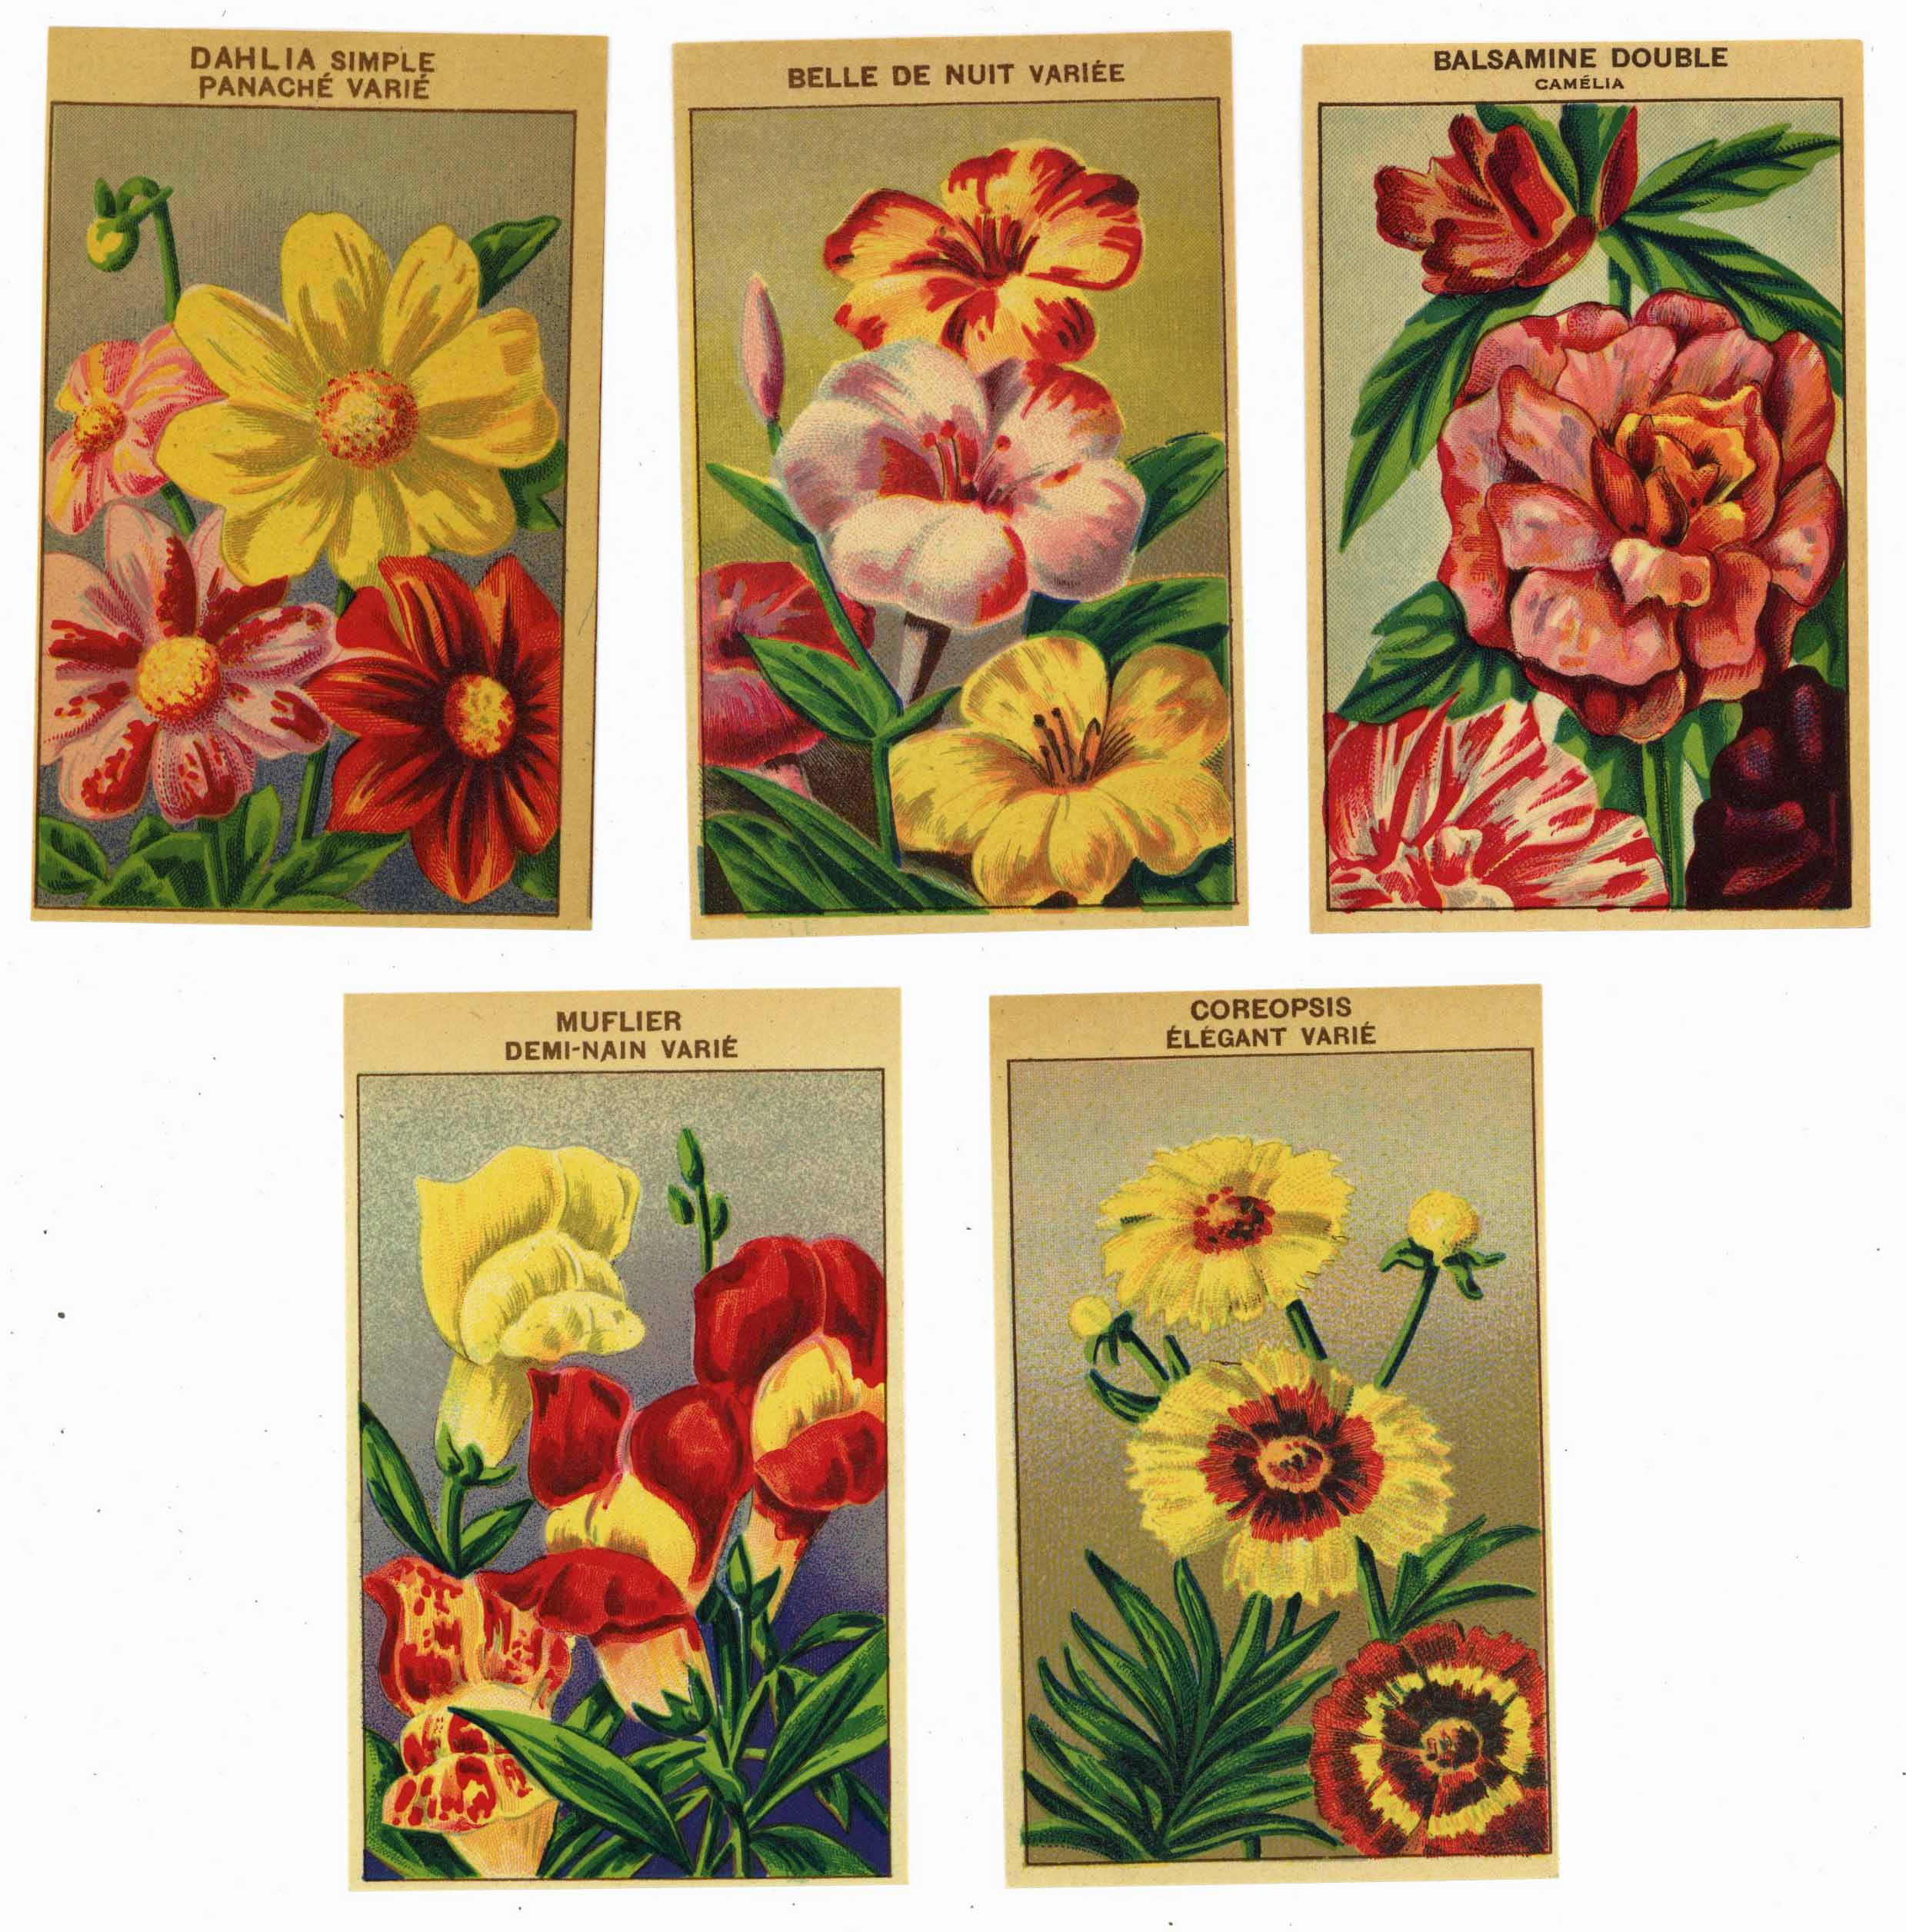 A Collection of 15 Vintage Flower Seed Packets – thelabelman